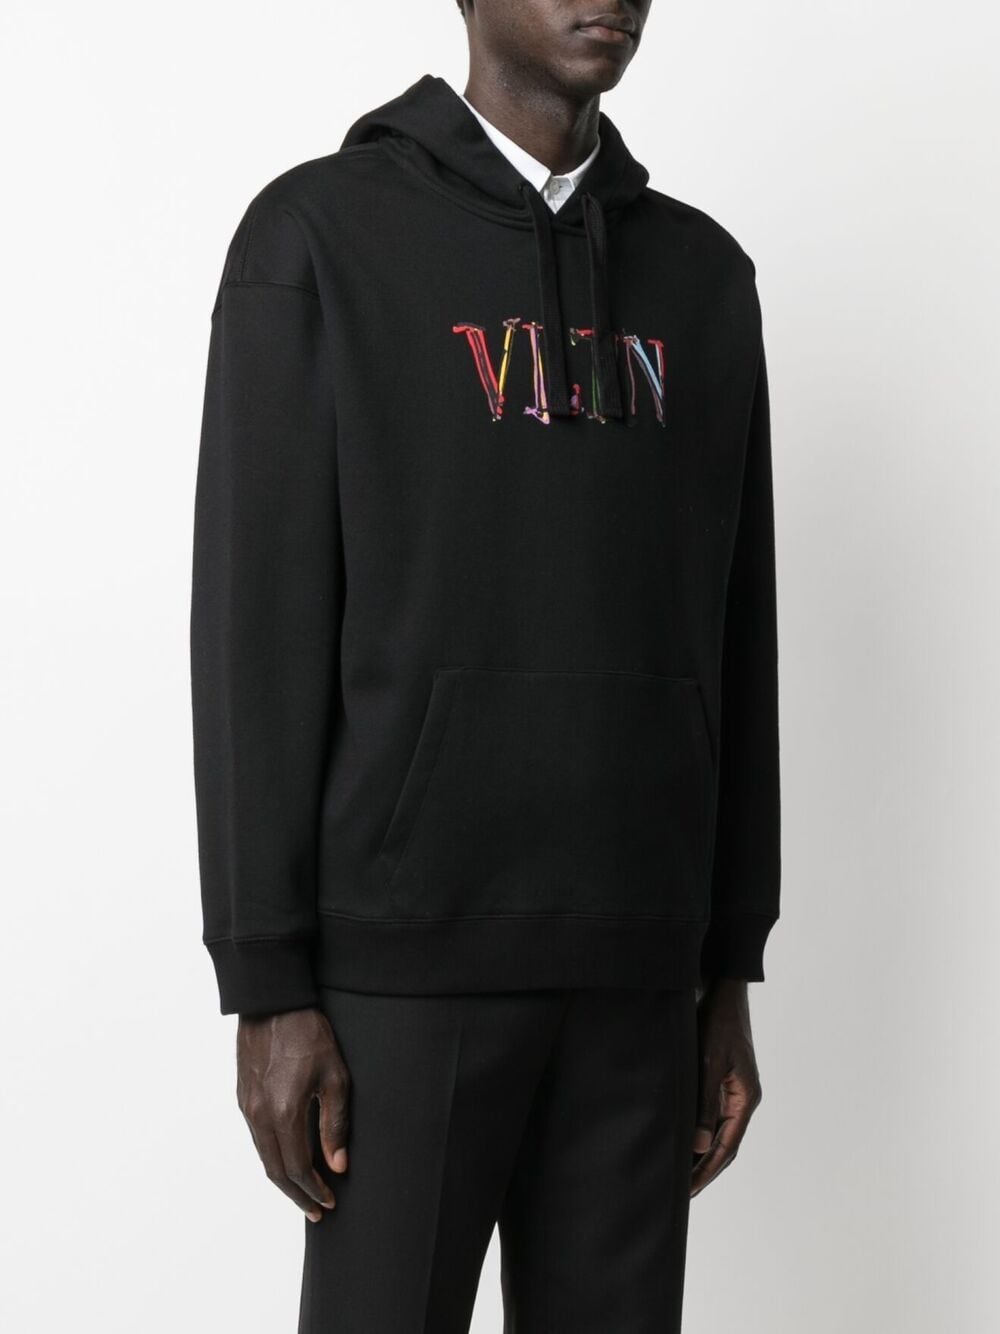 Shop Valentino hand-drawn logo hoodie with Express Delivery - FARFETCH